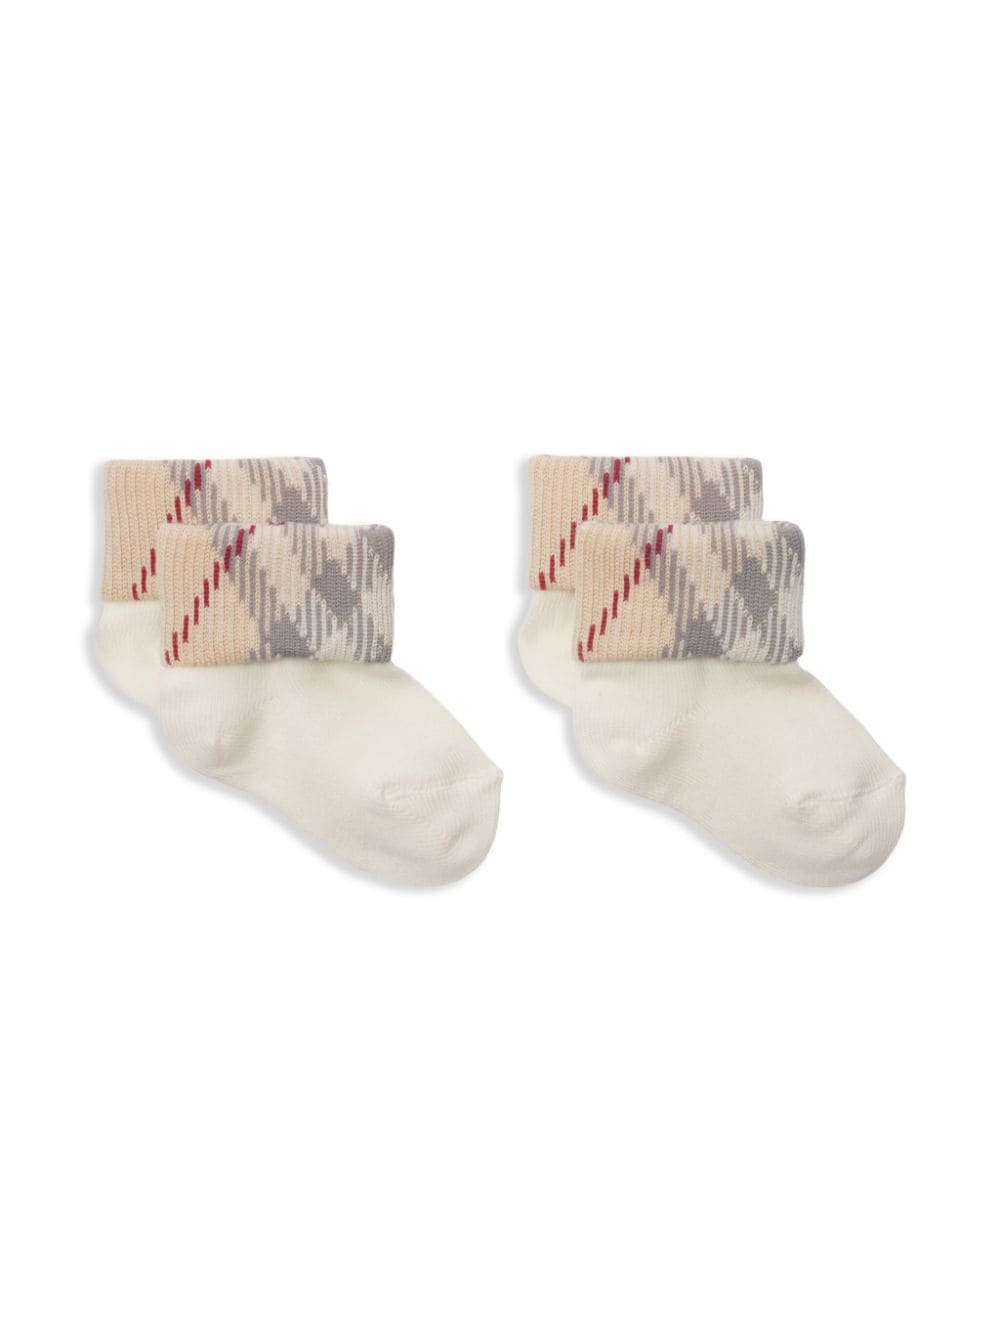 Burberry Babies' Two-piece Socks Set In White